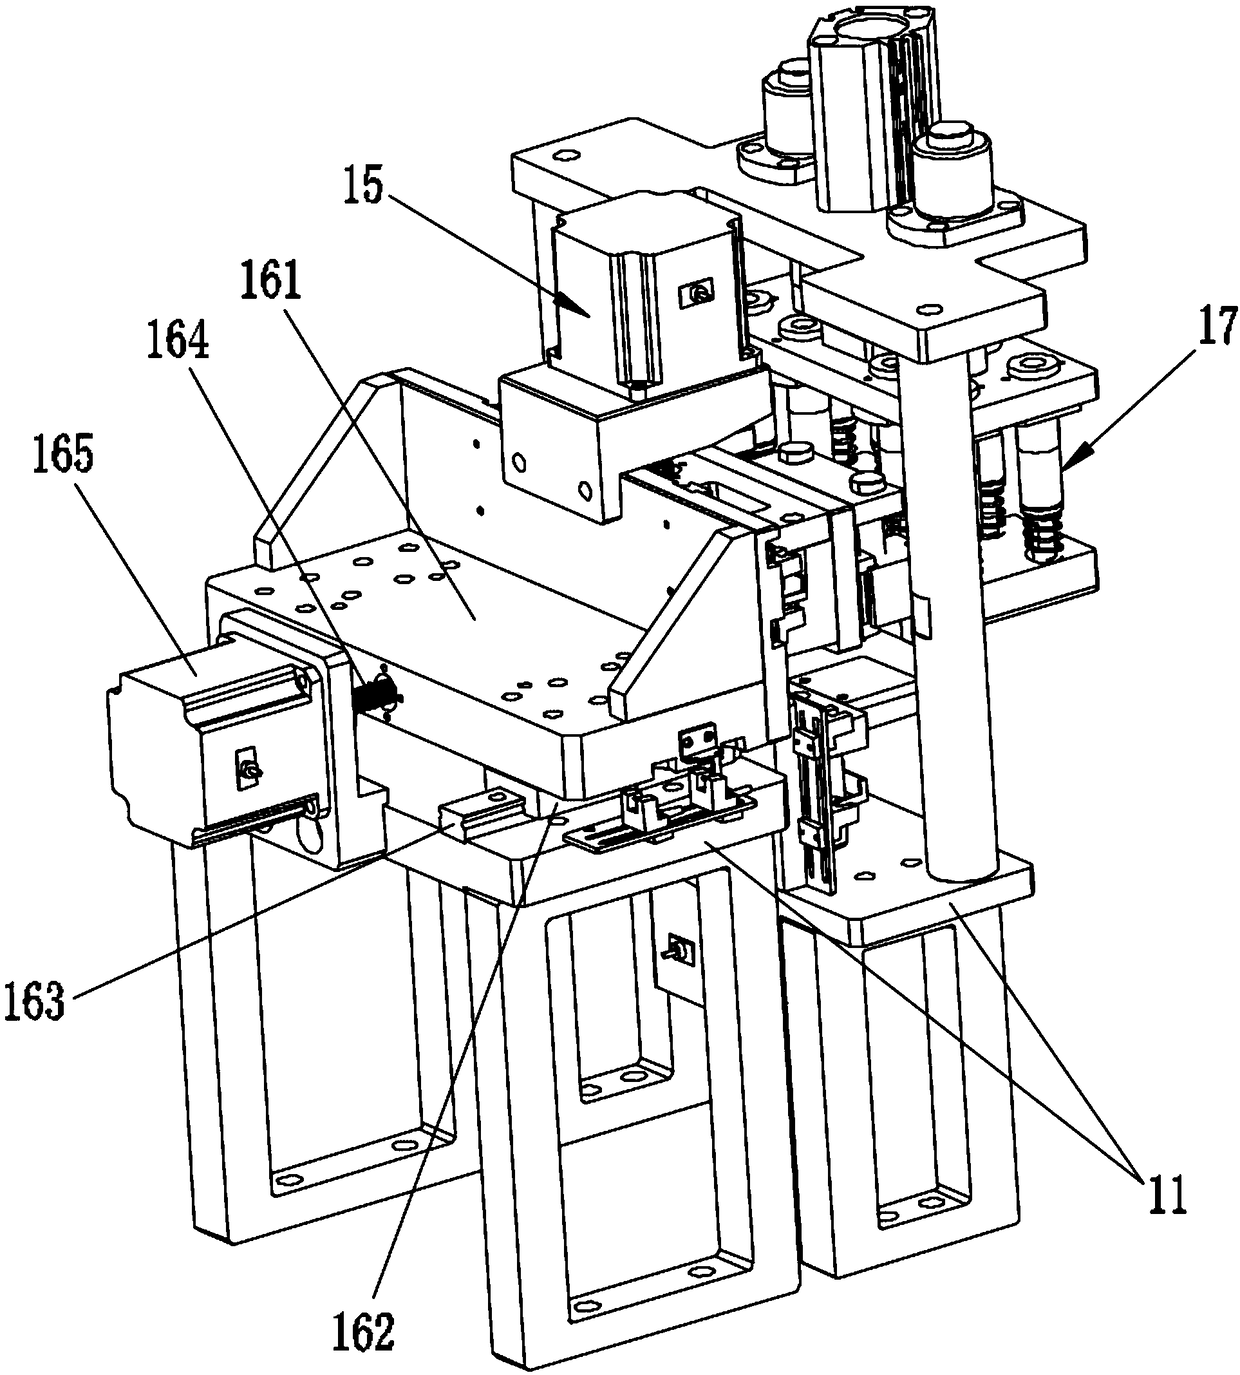 A machining apparatus for an electrode ear of an electric cell